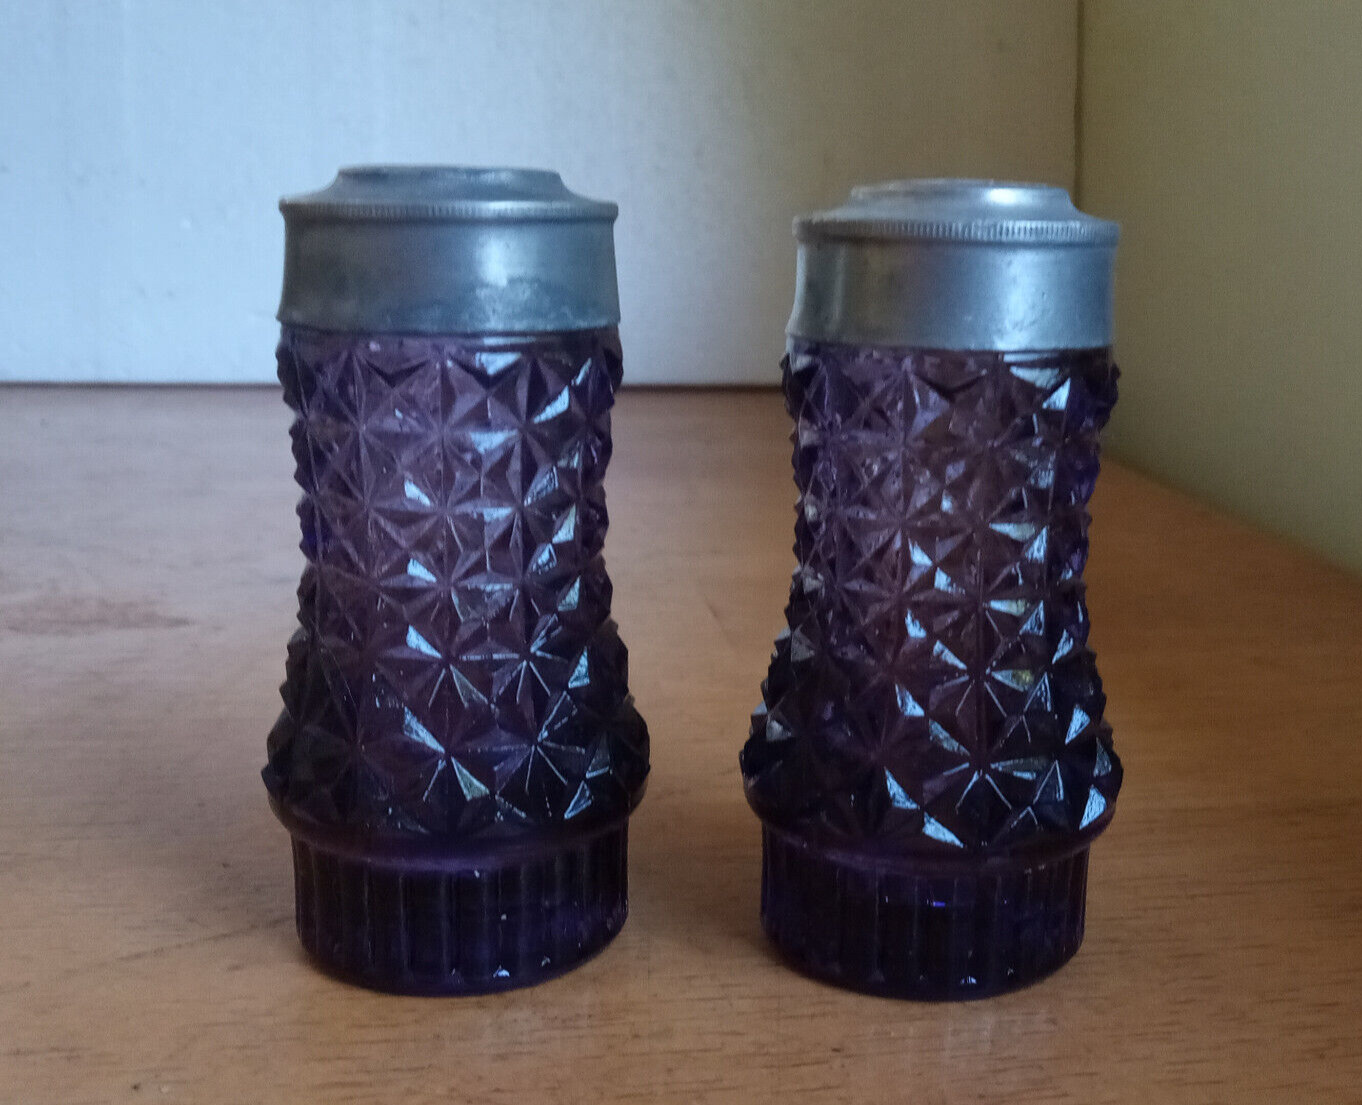 1890 MATCHING PAIR OF PRETTY AMETHYST GLASS SALT PEPPER SHAKERS WITH LIDS